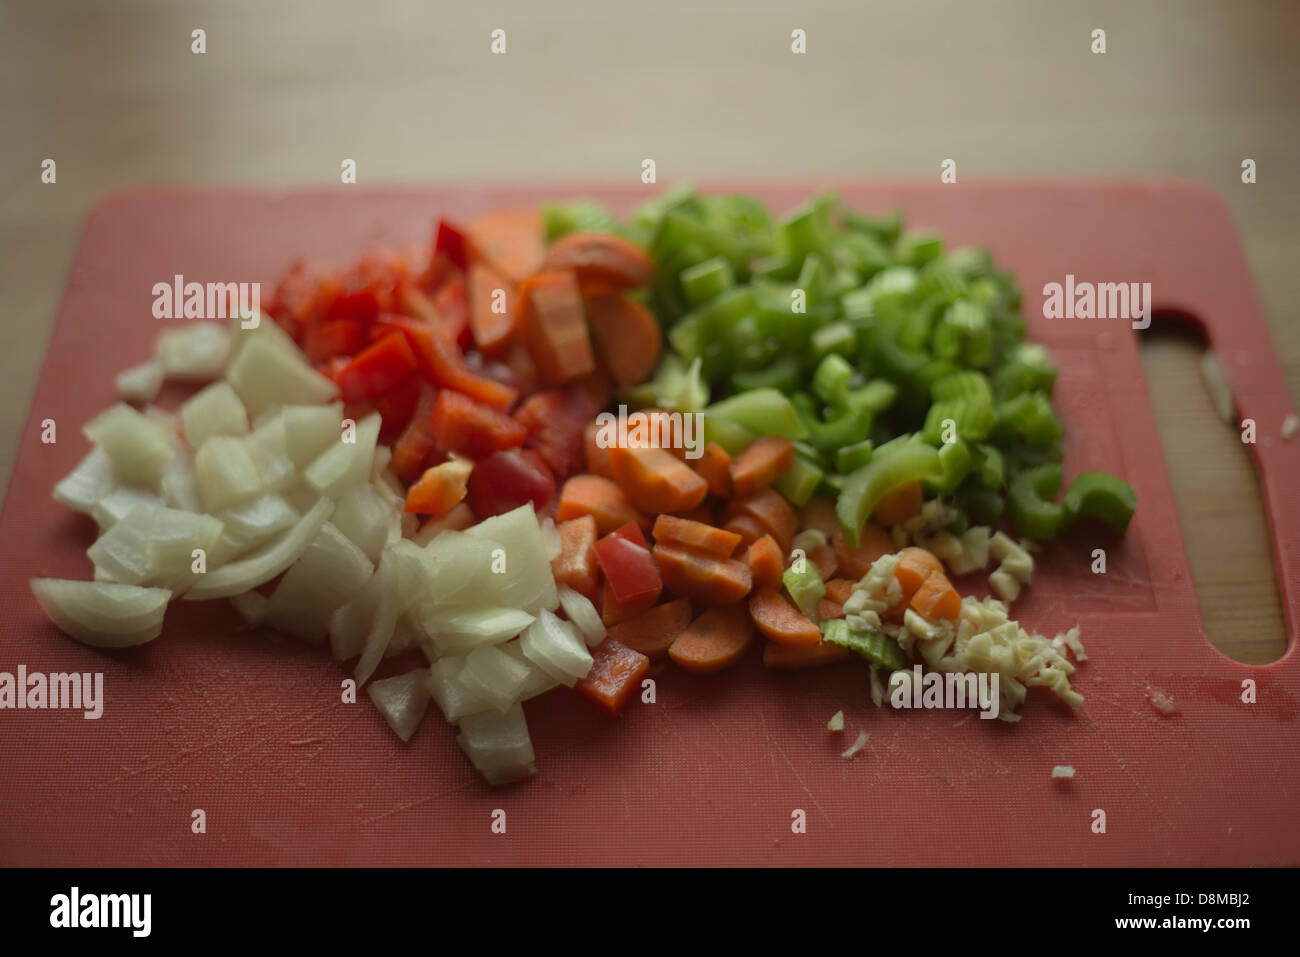 Chopped vegetables on cutting board Stock Photo